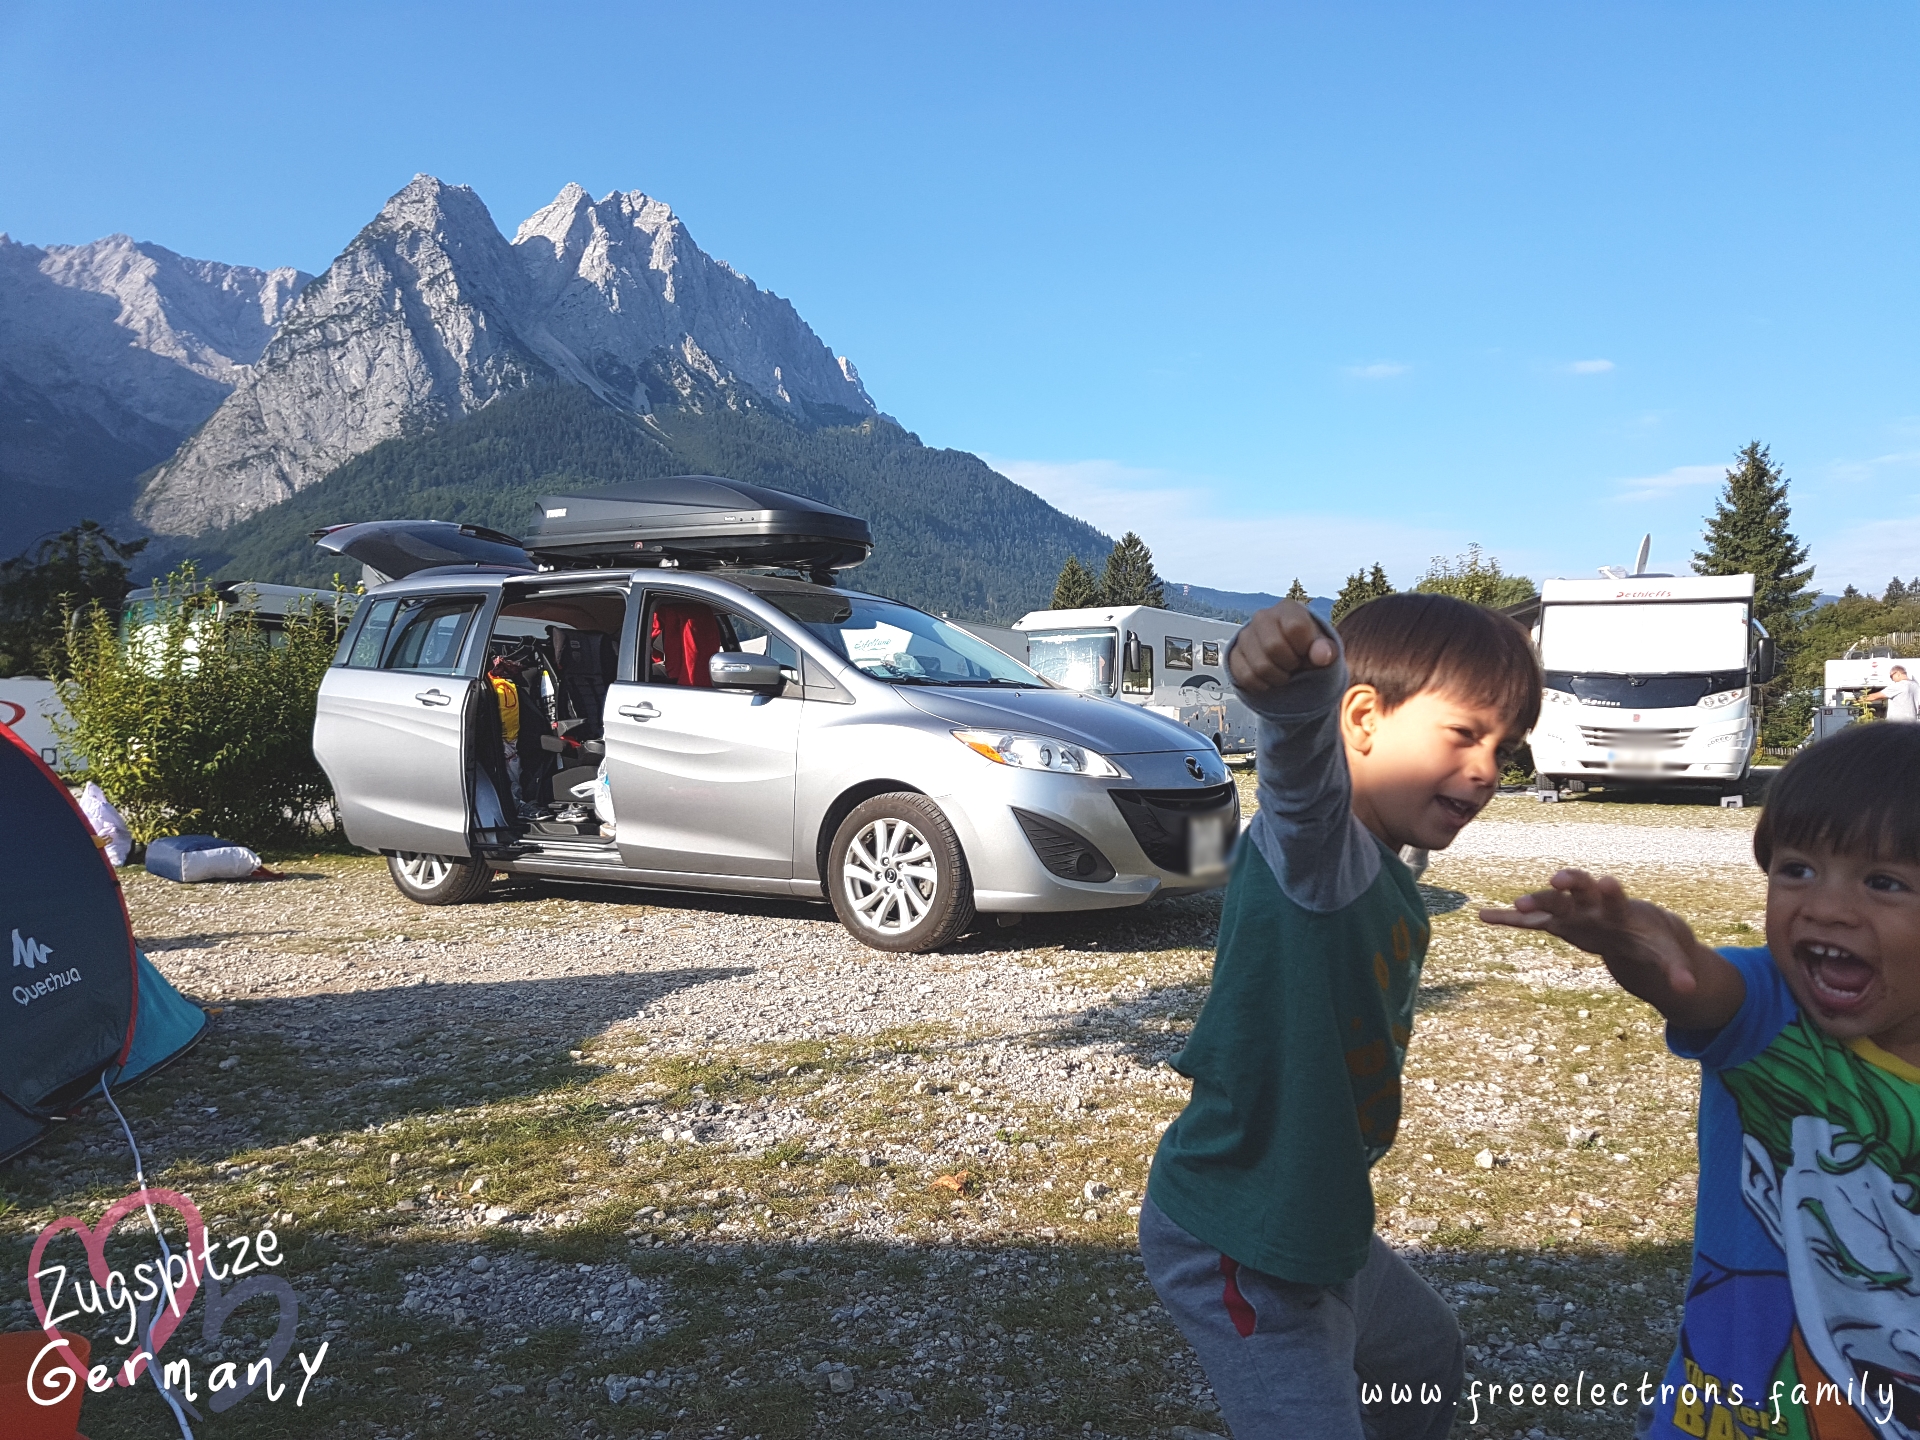 #FreeElectrons.Family - camping road trip Europe, Quechua and Mazda, Germany.

Kids having fun at a camping site with rocky mountain peaks in the background.  Behind them are RVs, a silver Mazda MPV 5 with a black Thule Roofbox, and part of a Quechua tent.

Postcard-like text reads: Zugspitze, Germany with an opaque image of two hearts behind the text and www.freeelectrons.com.
